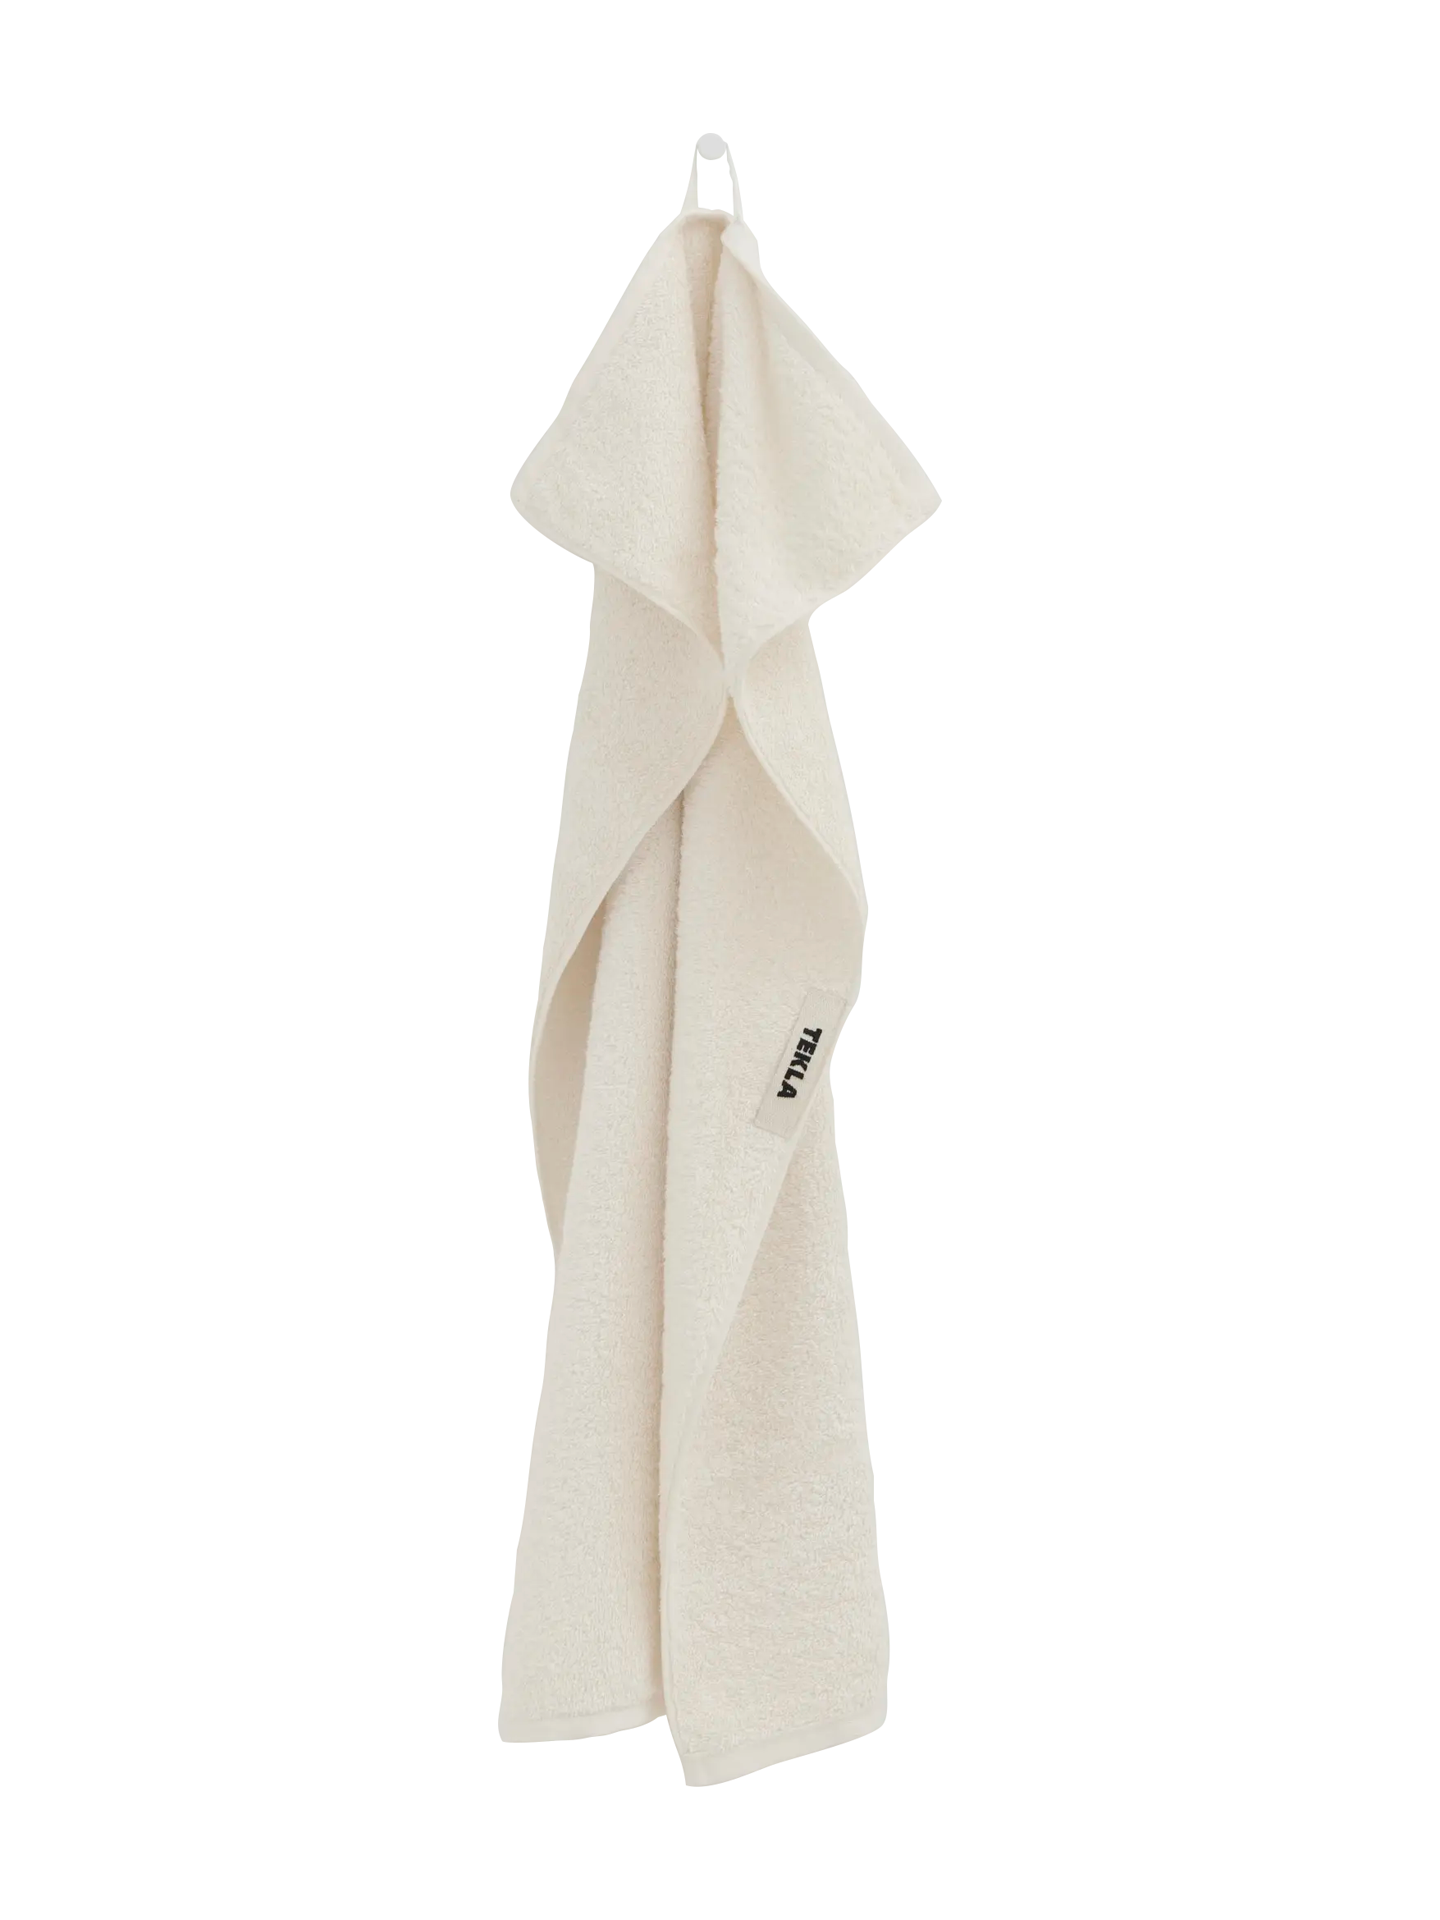 Terry Hand Towel, Solid Ivory